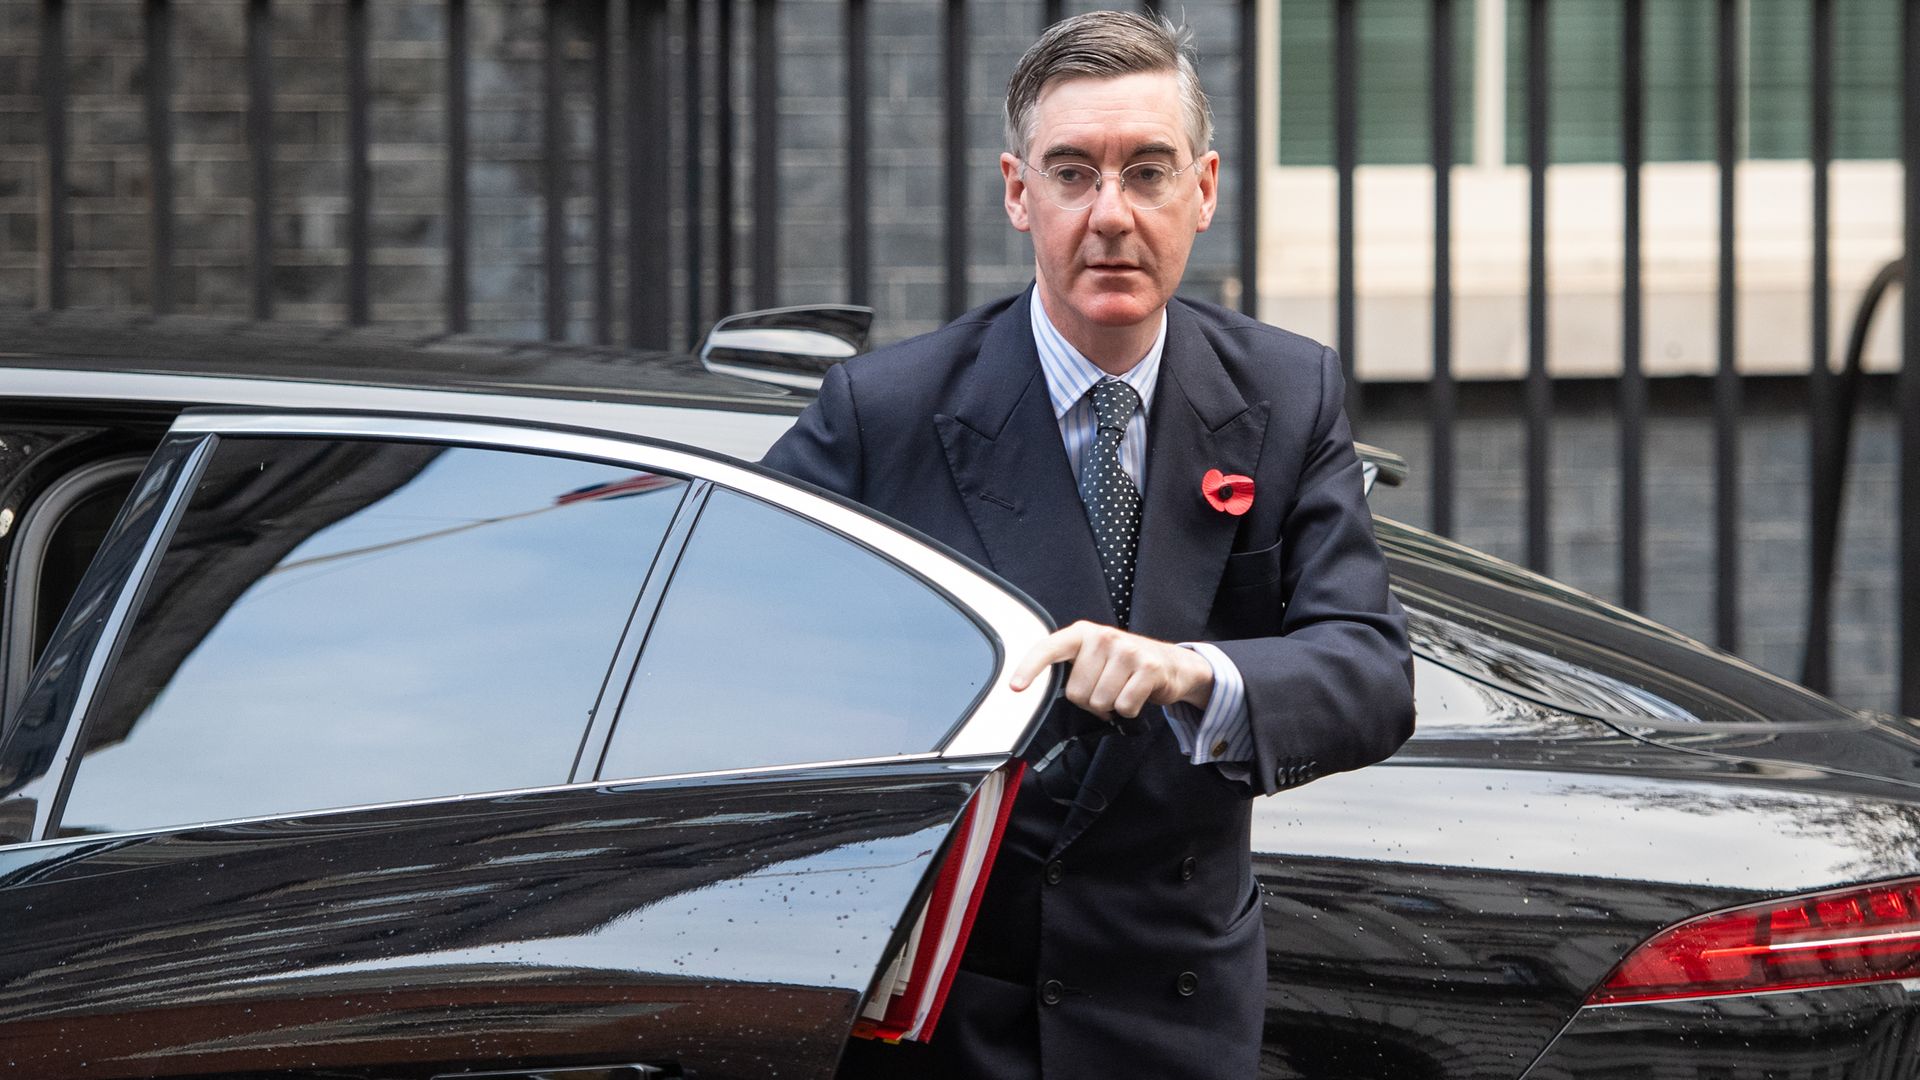 Leader of the House of Commons Jacob Rees Mogg in Downing Street, London, ahead of a Cabinet meeting at the Foreign and Commonwealth Office (FCO). - Credit: PA